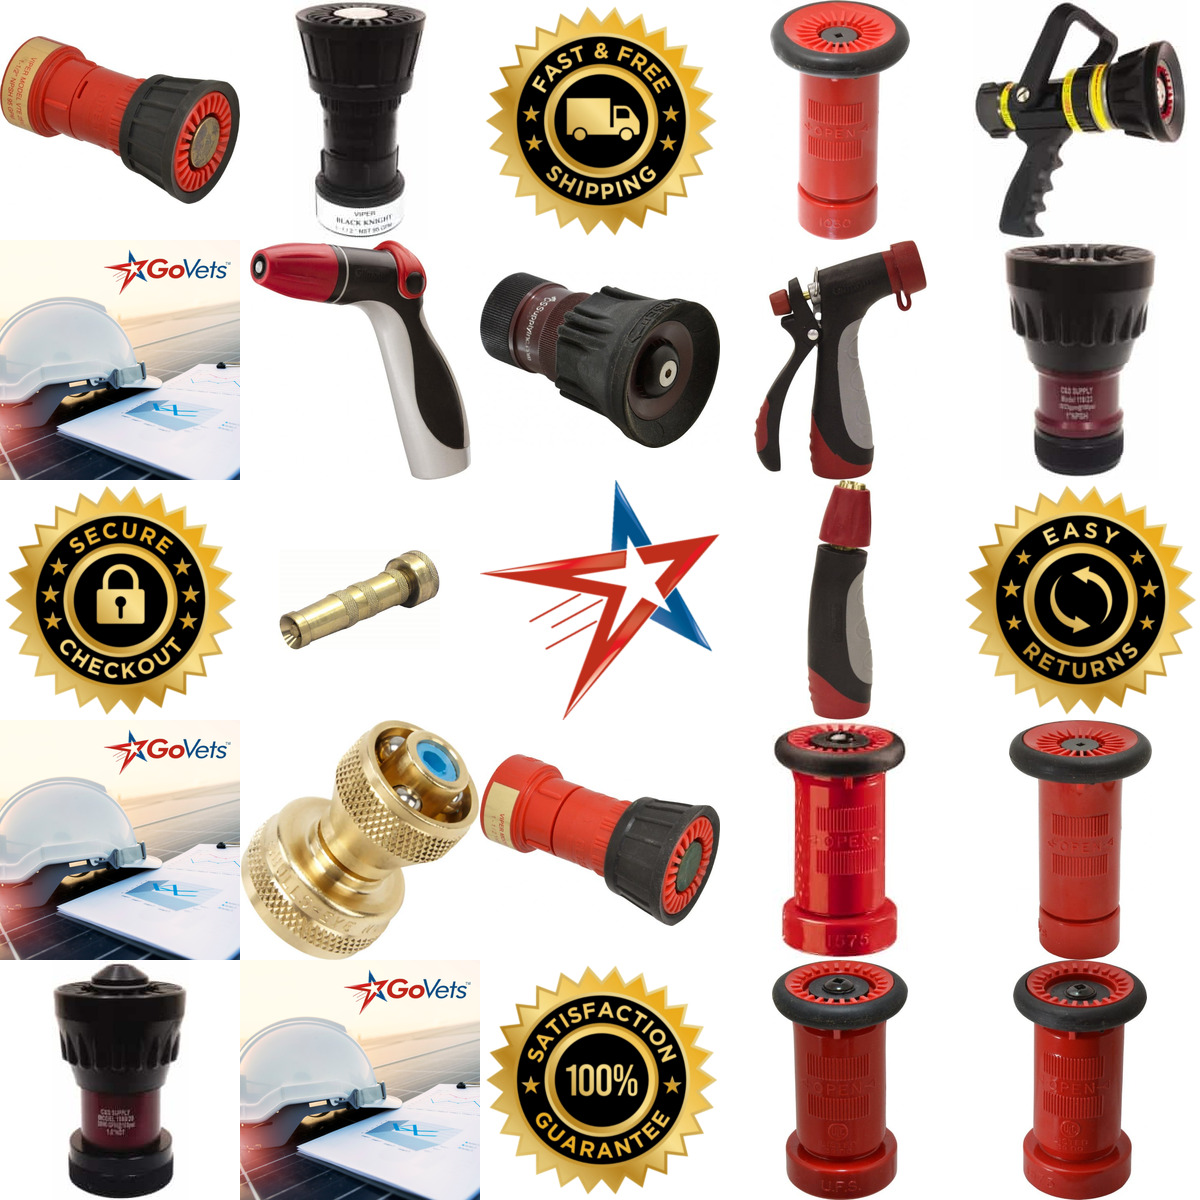 A selection of Hose Nozzles products on GoVets